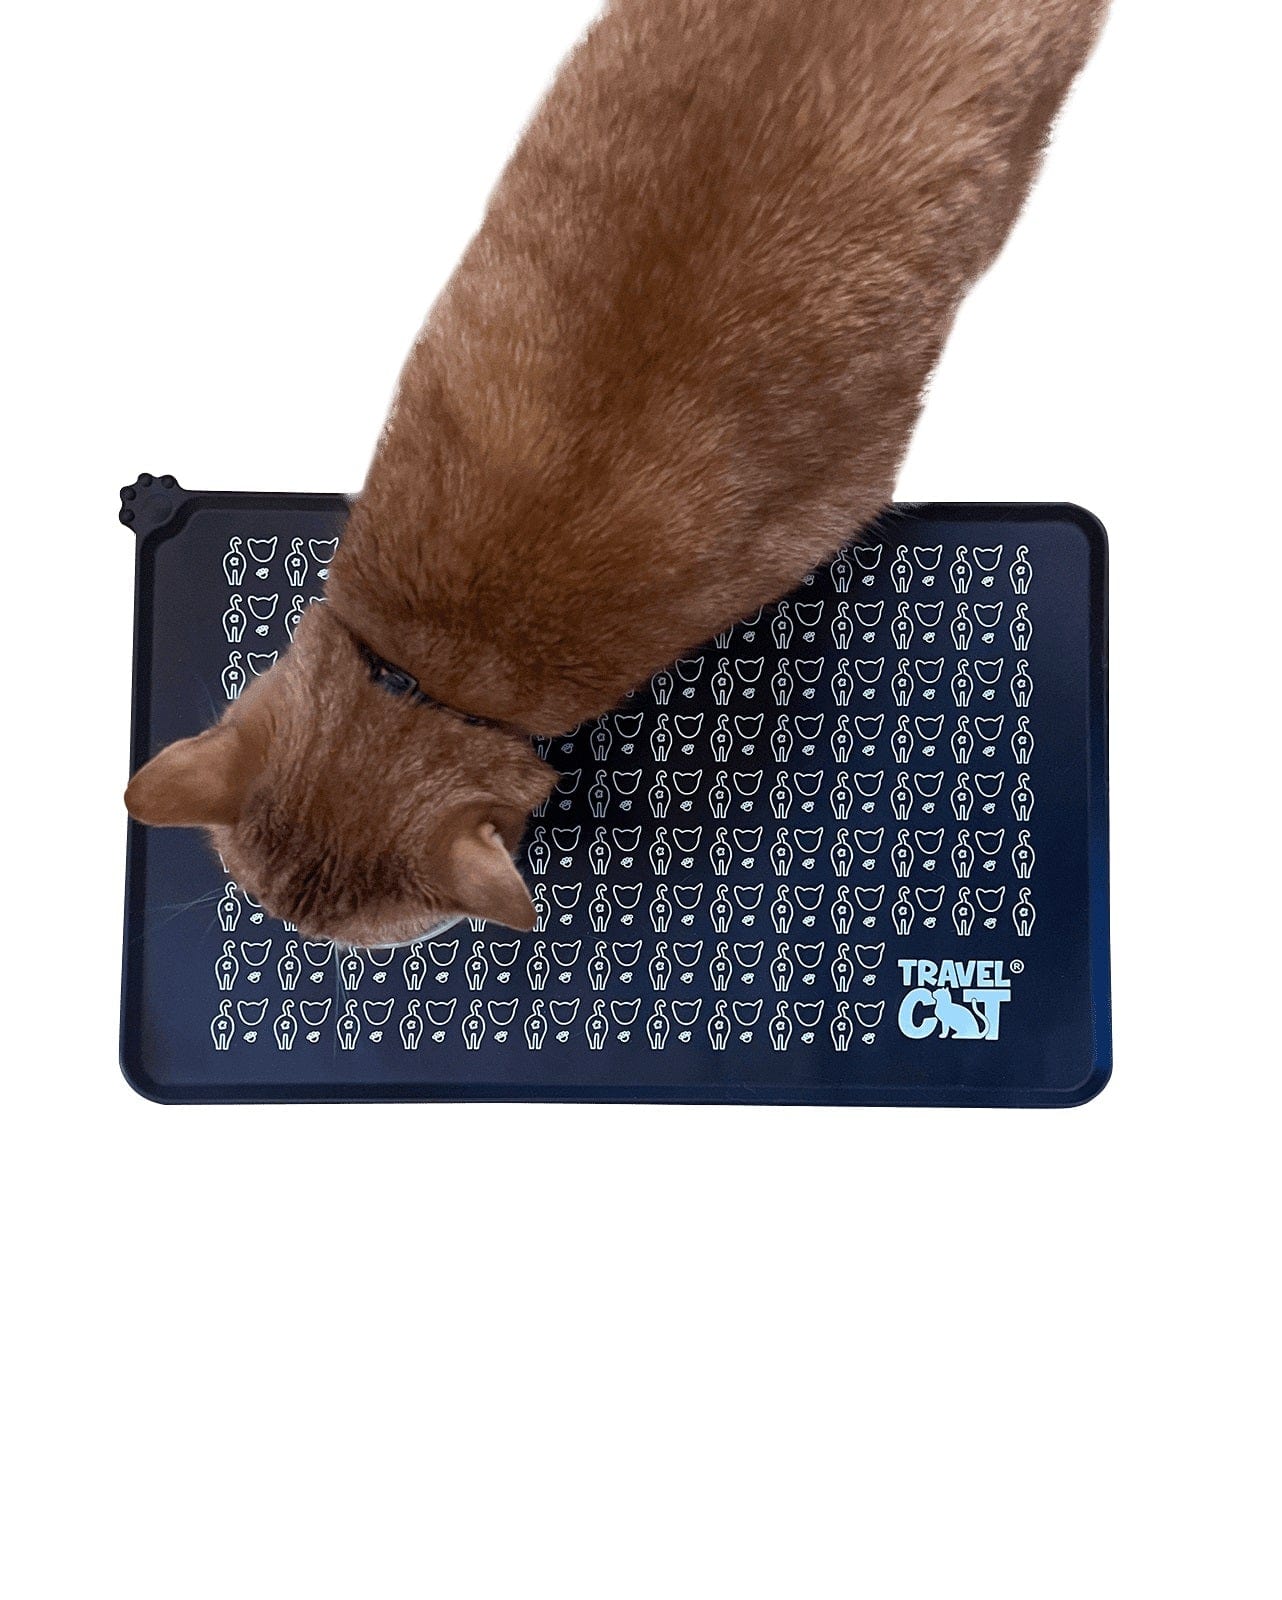 BLACK FRIDAY FREE GIFT! "The Nice & Tidy" Cat Food & Water Feeding Mat